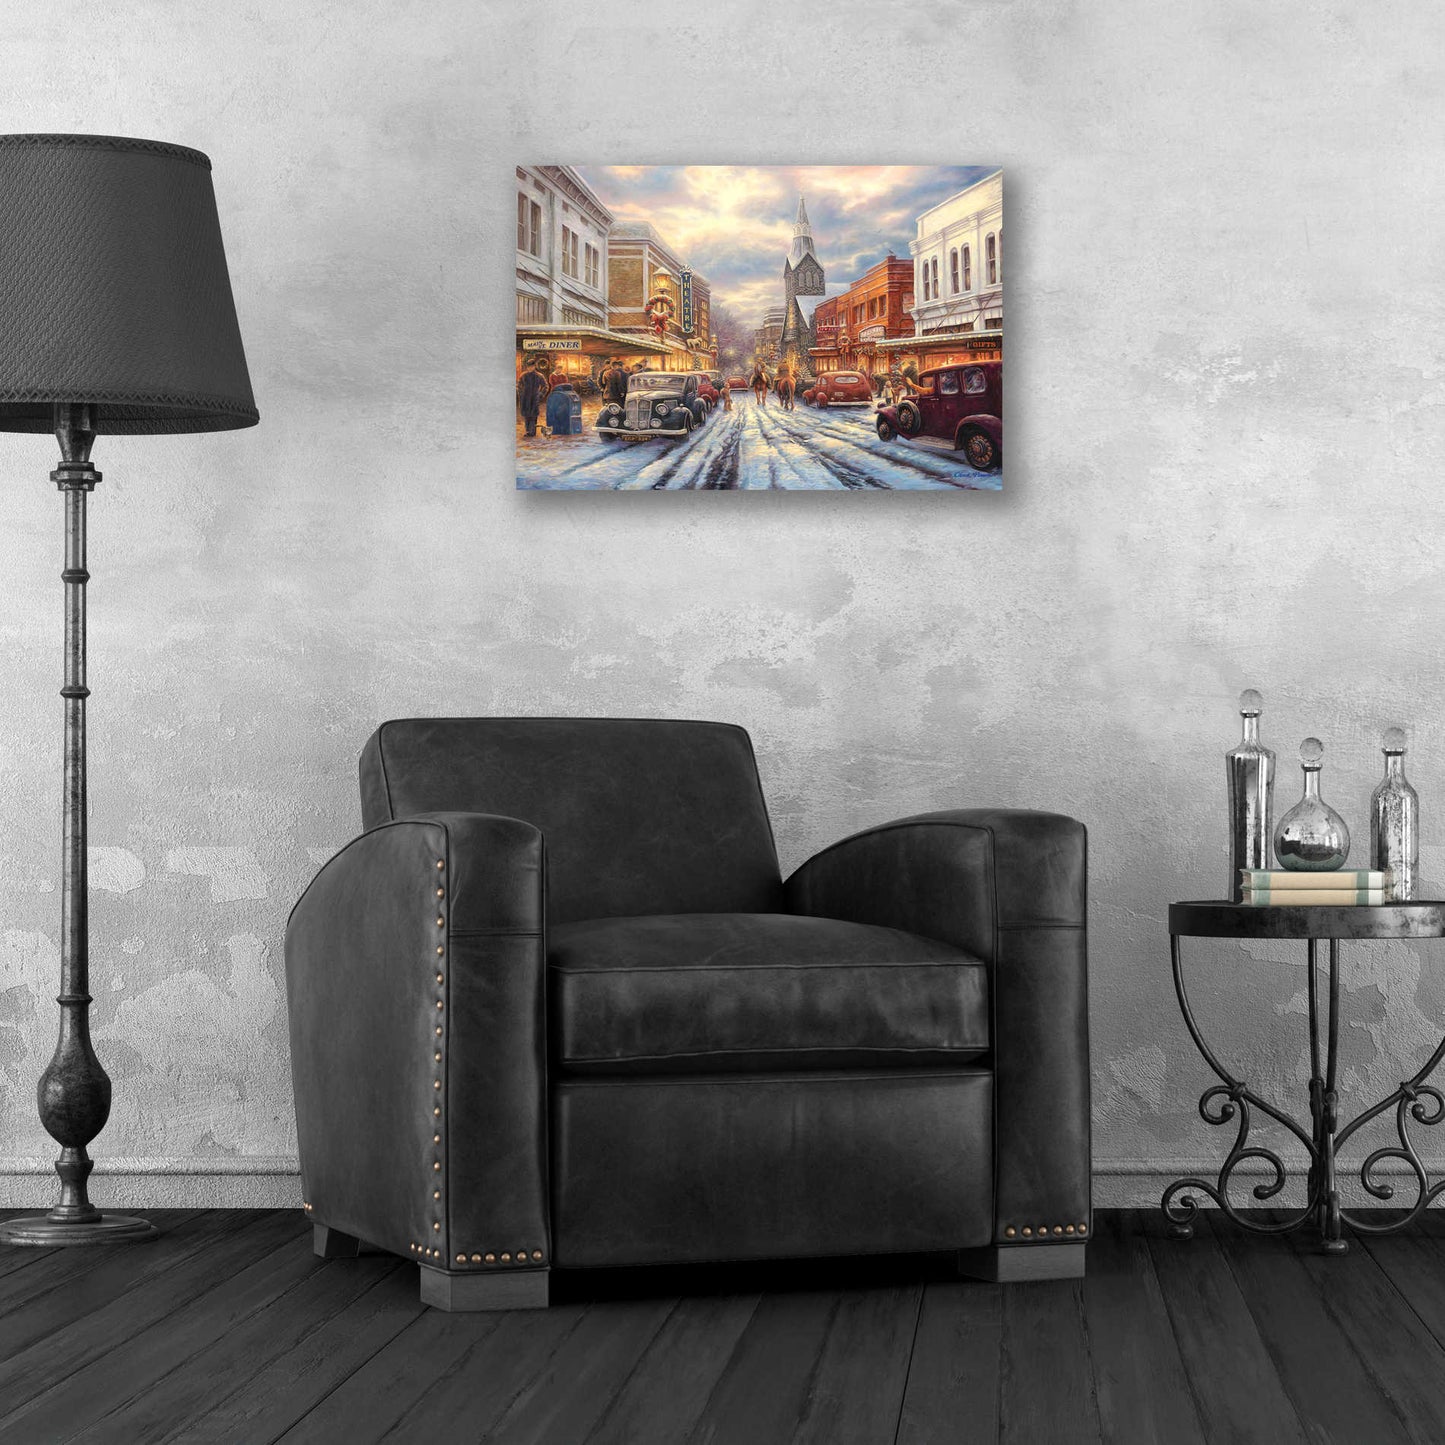 Epic Art 'The Warmth of Small Town Living' by Chuck Pinson, Acrylic Glass Wall Art,24x16